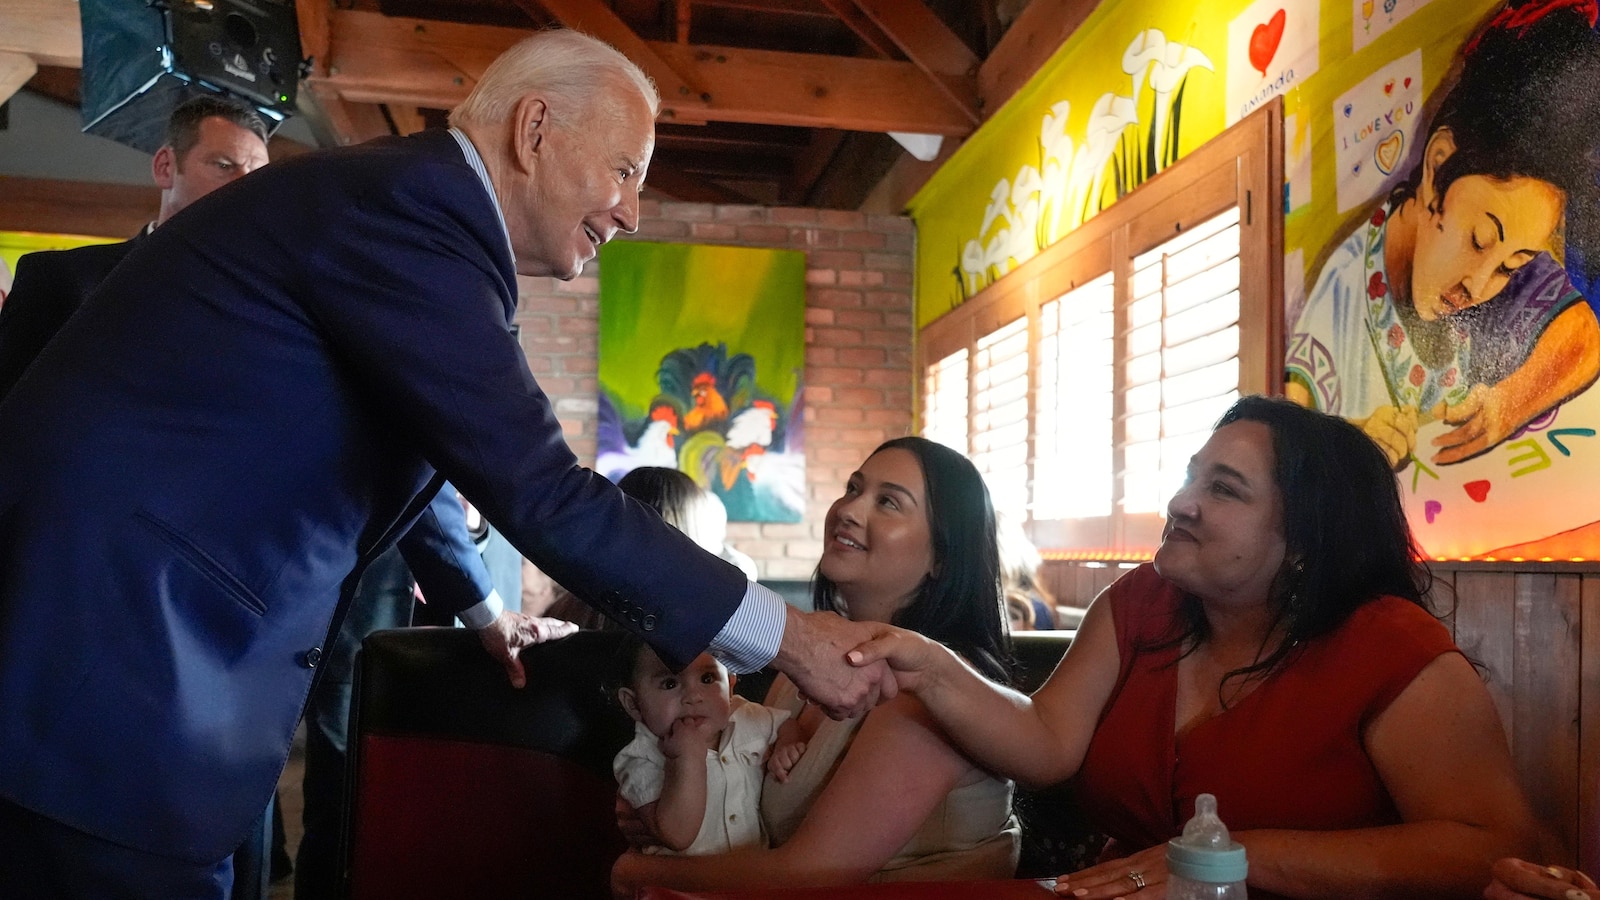 Biden tours swing states while Trump focuses on fundraising and golfing